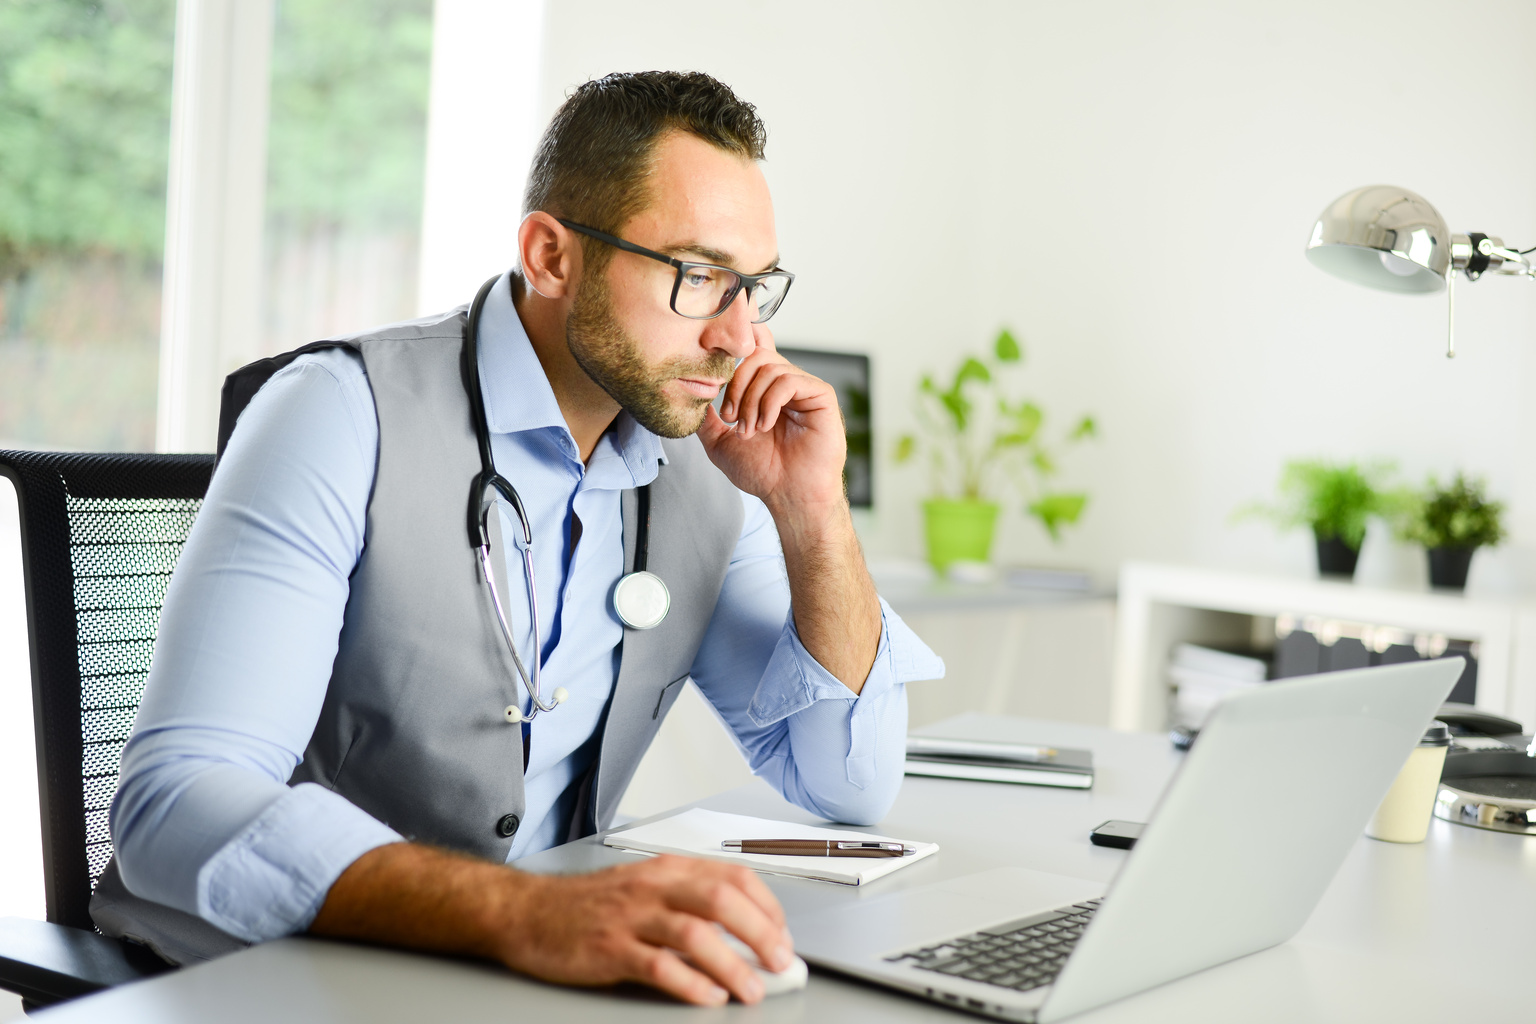 Male doctor on laptop in clinic office